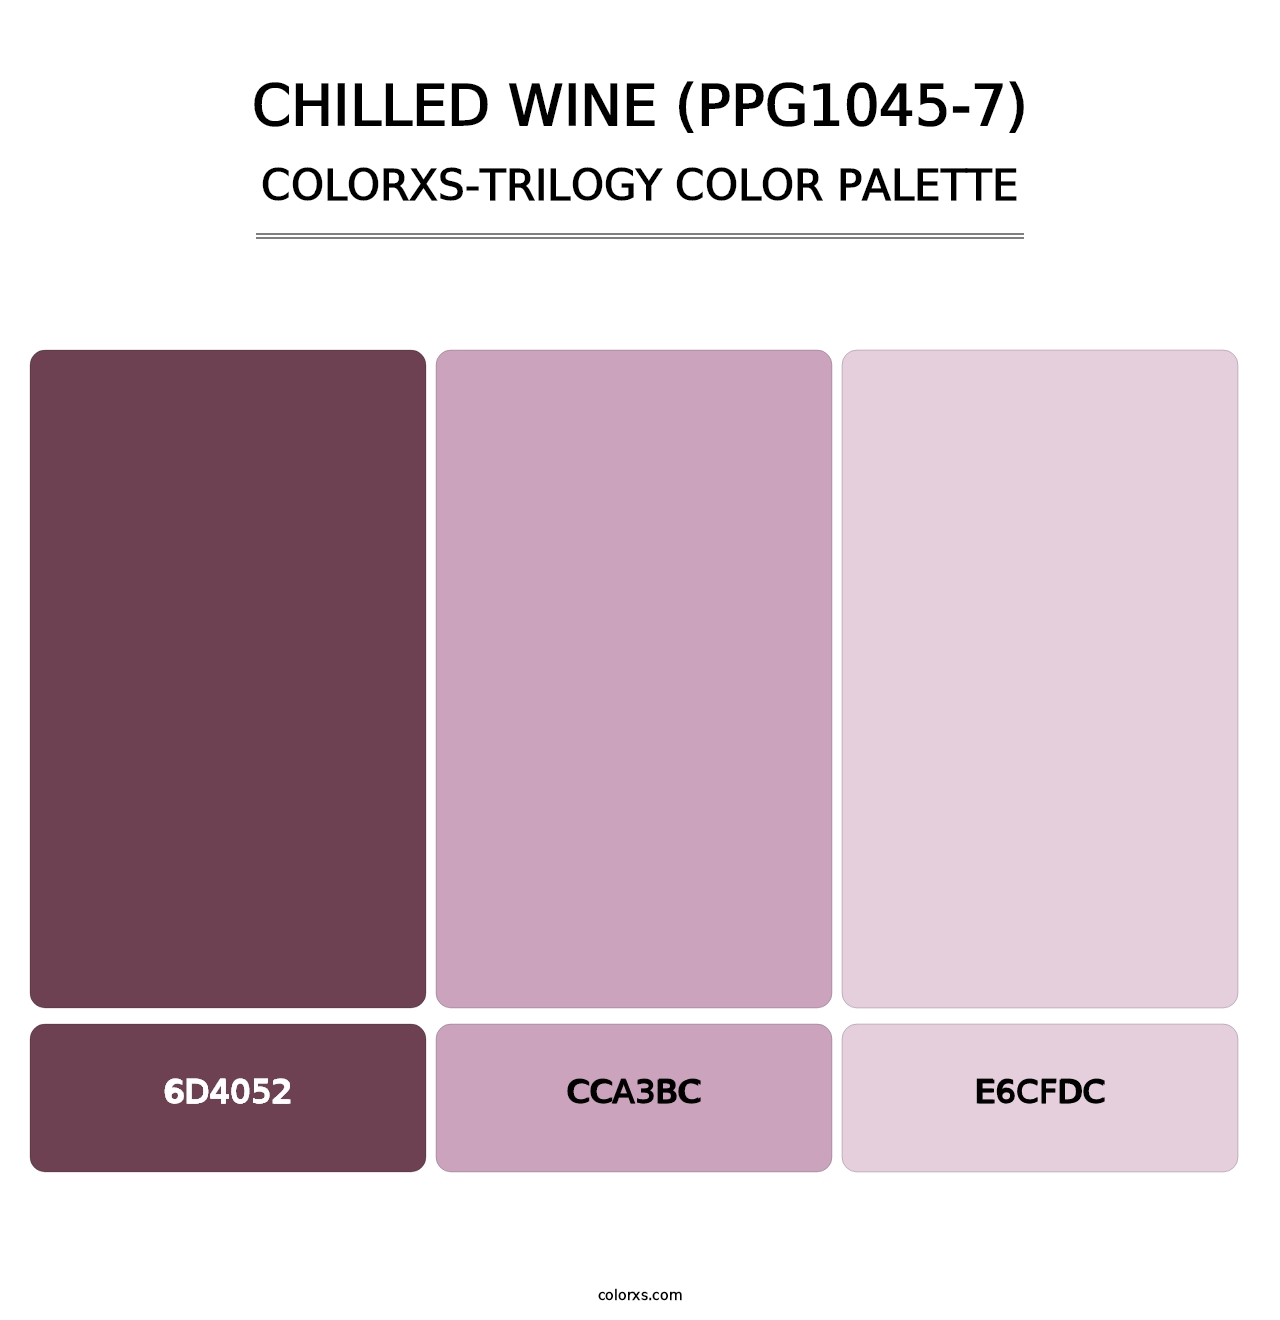 Chilled Wine (PPG1045-7) - Colorxs Trilogy Palette